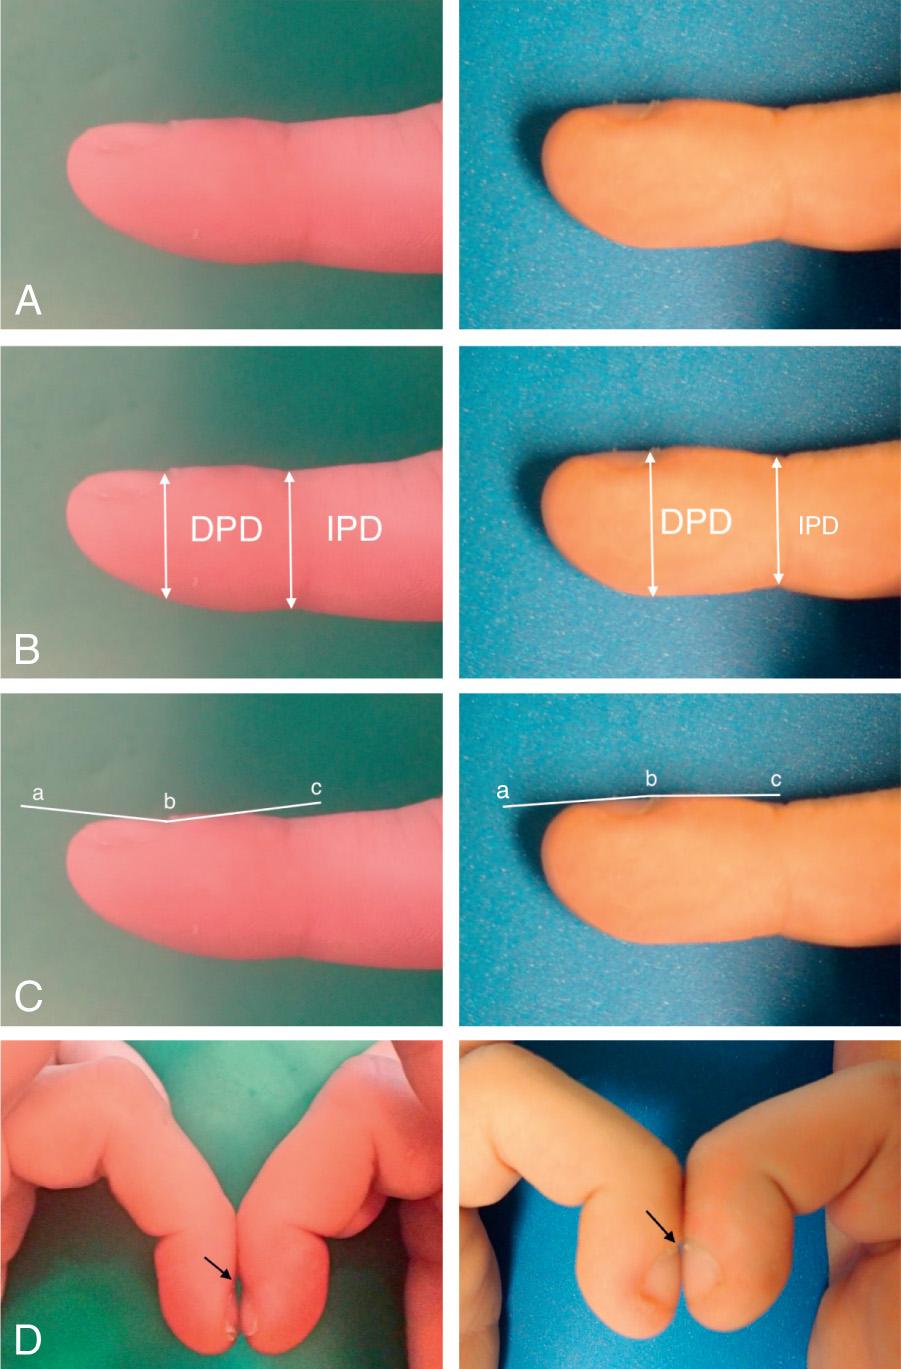 Fig. 400.3, A, Normal and clubbed finger viewed in profile. B, The normal finger demonstrates a distal phalangeal finger depth (DPD) /interphalangeal finger depth (IPD) ratio <1. The clubbed finger demonstrates a DPD/IPD ratio >1. C, The normal finger on the left demonstrates a normal profile (abc) with angle less than 180 degrees. The clubbed finger demonstrates a profile angle >180 degrees. D, Schamroth sign is demonstrated in the clubbed finger with the loss of diamond shape window in between finger beds (arrow) that is demonstrated in the normal finger.